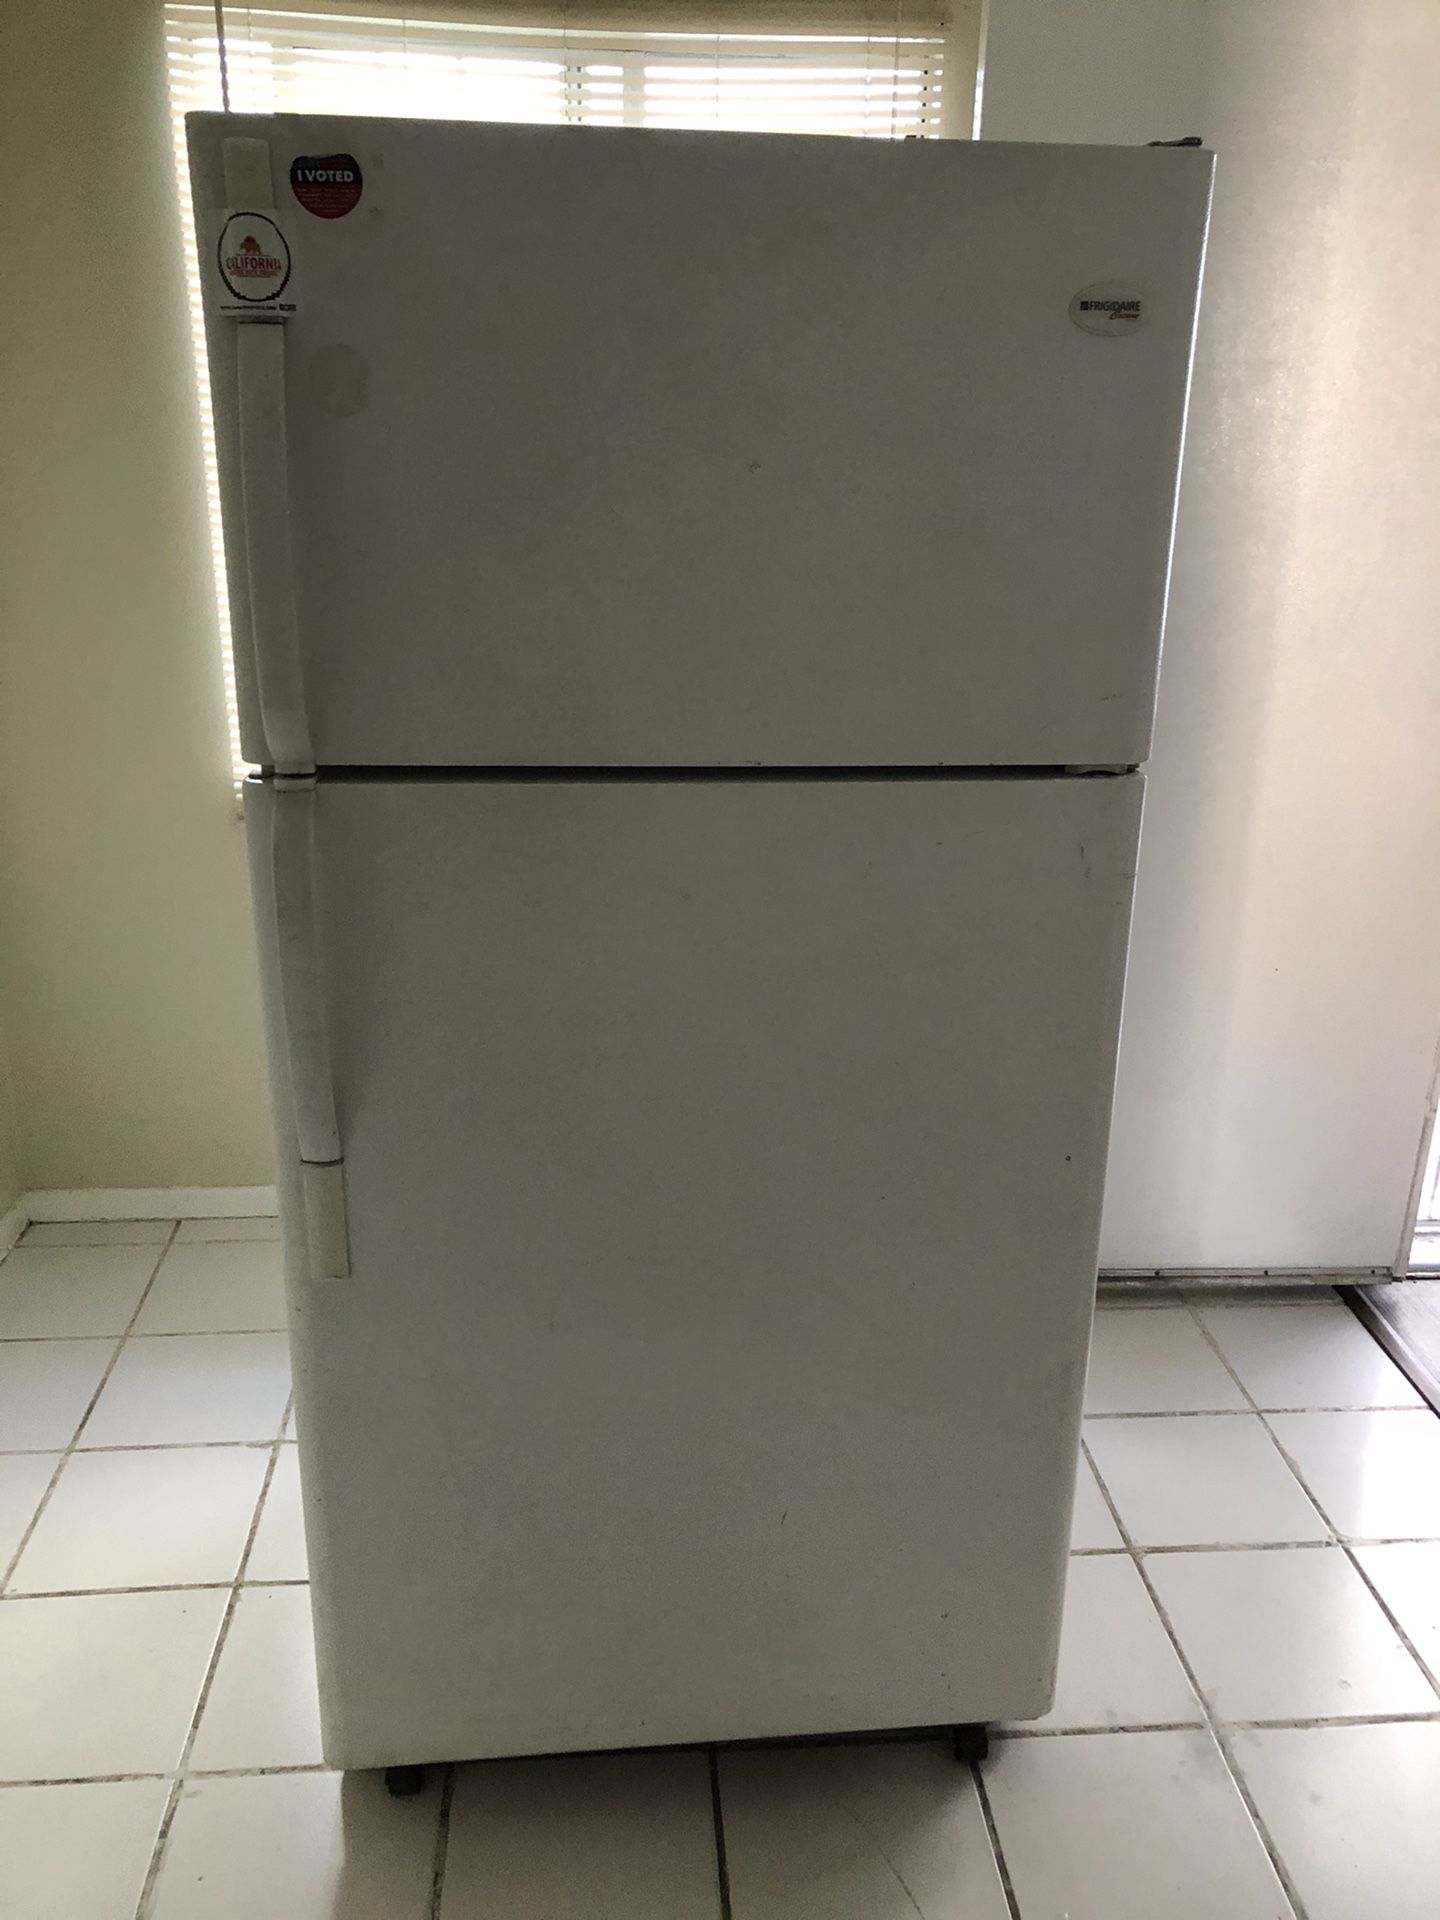 Frigidaire refrigerator - “The Ugly Ducking”